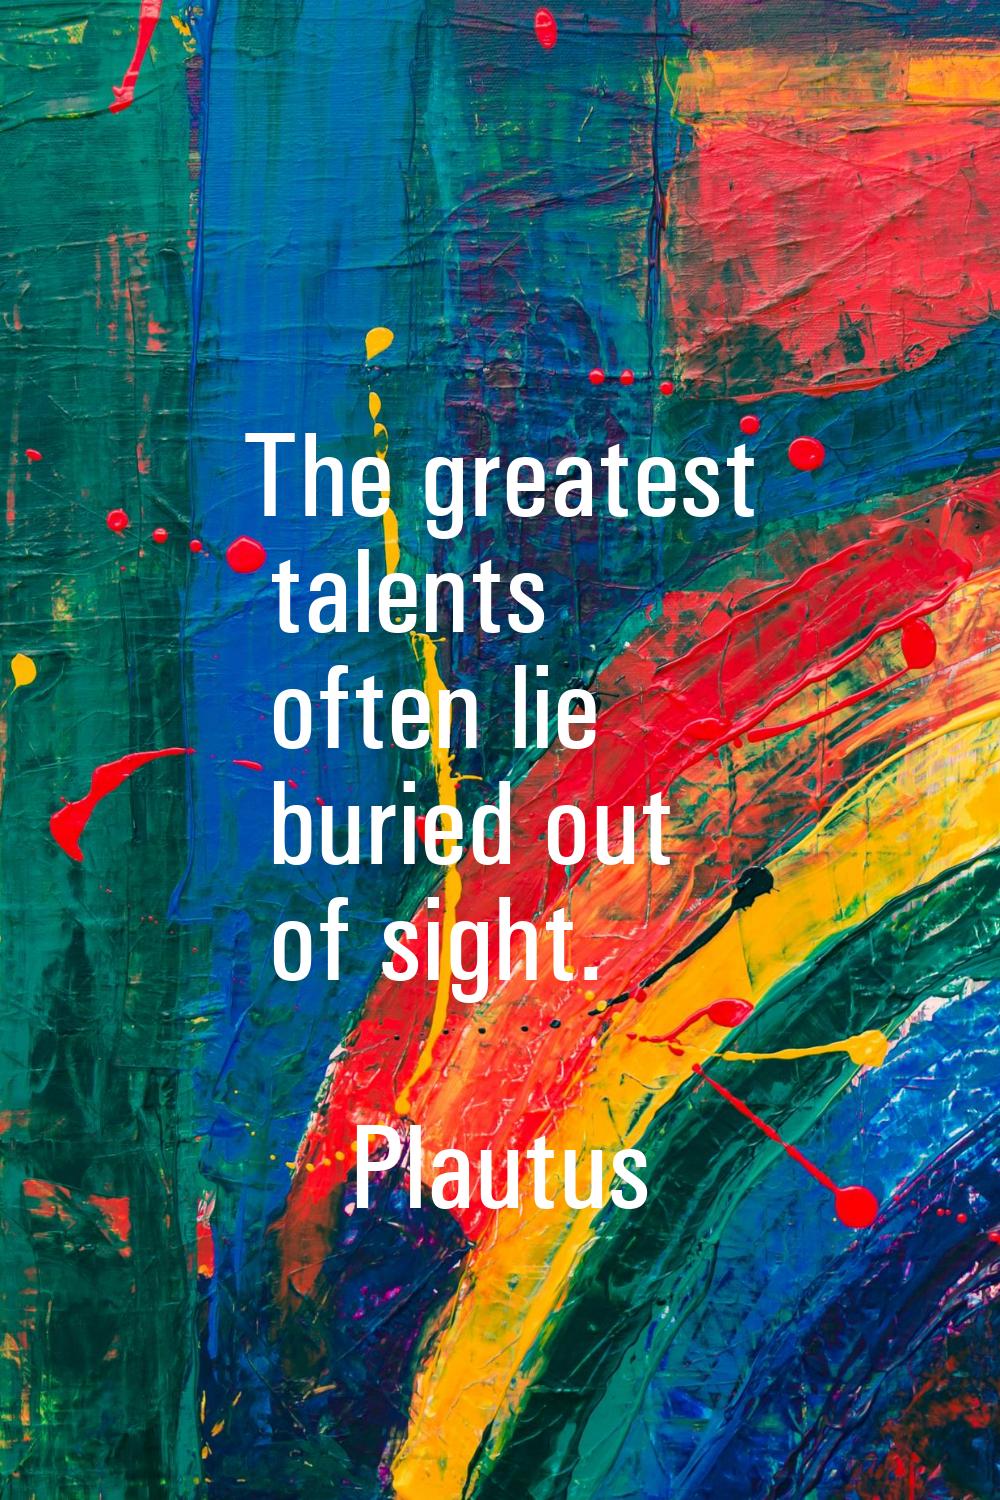 The greatest talents often lie buried out of sight.